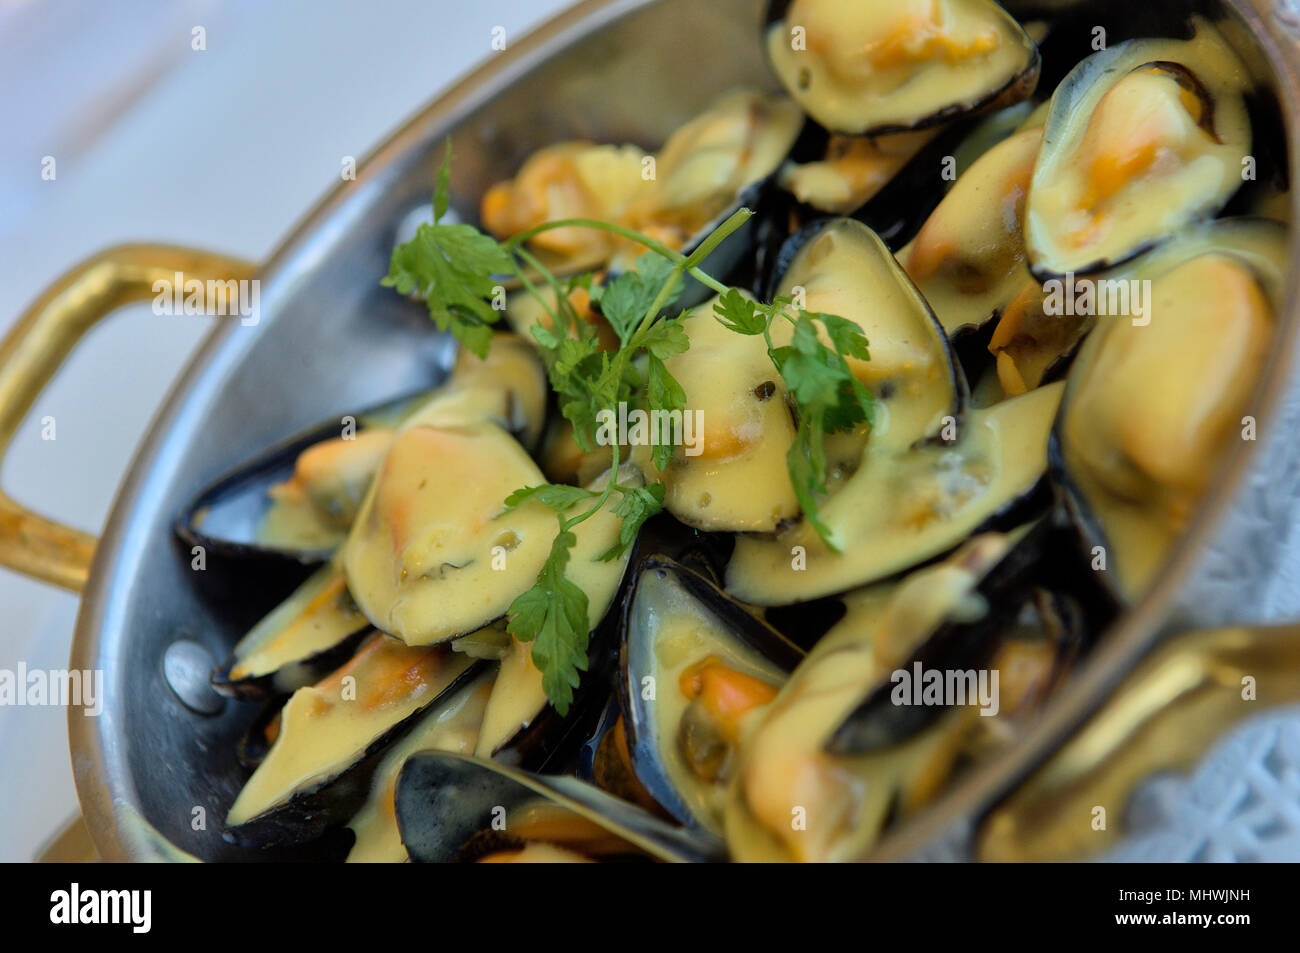 Baked mussels with cheese dish, La Chaloupe restaurant, Port des Barques,  France Stock Photo - Alamy